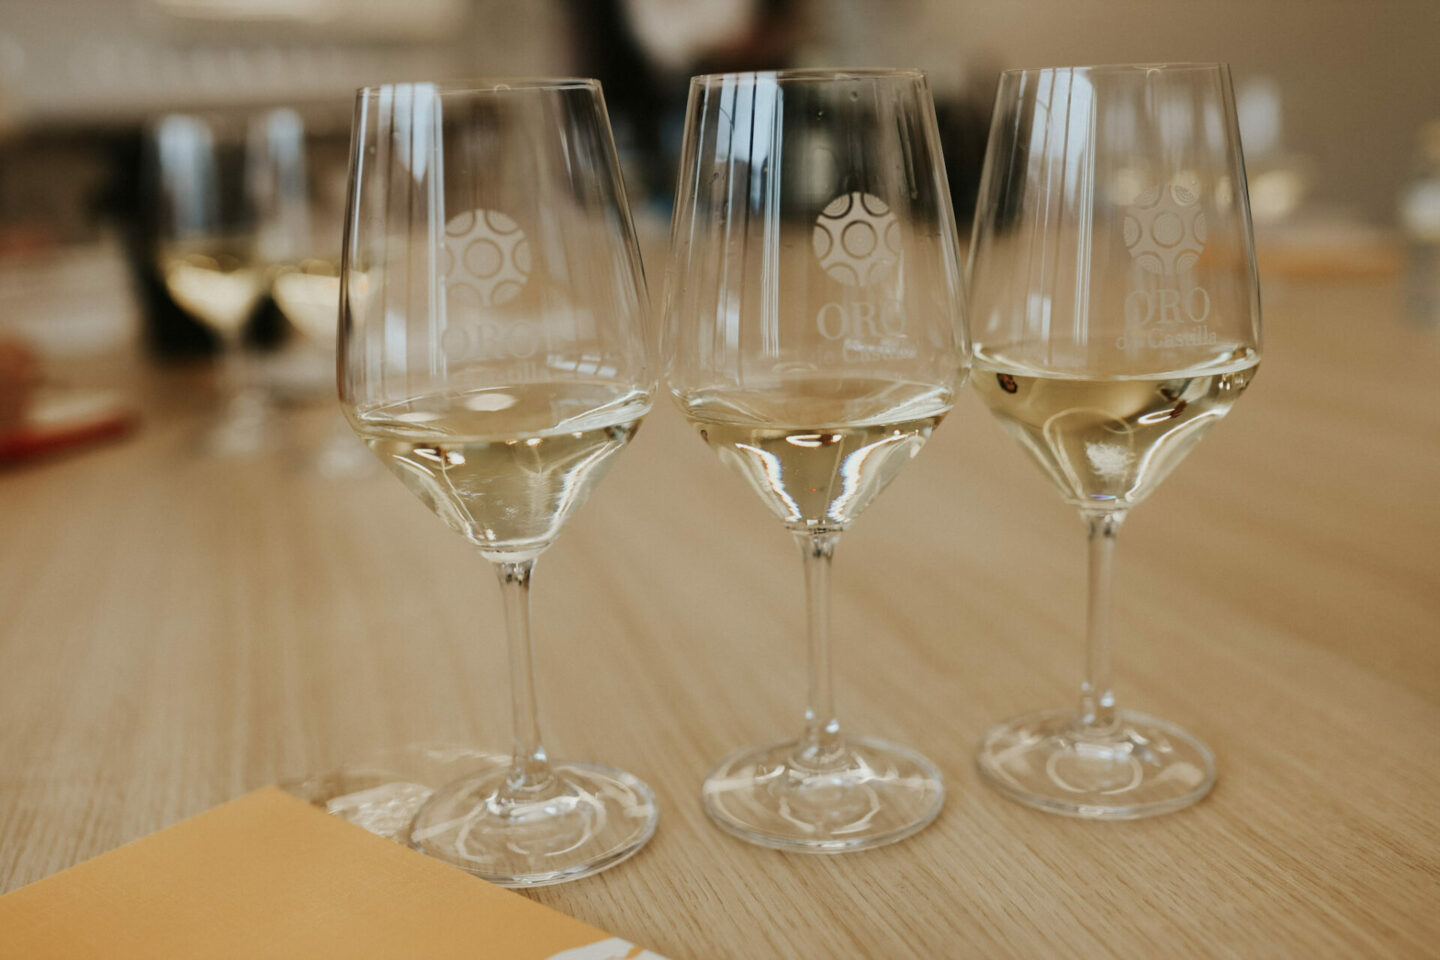 A lineup of Albarino wines